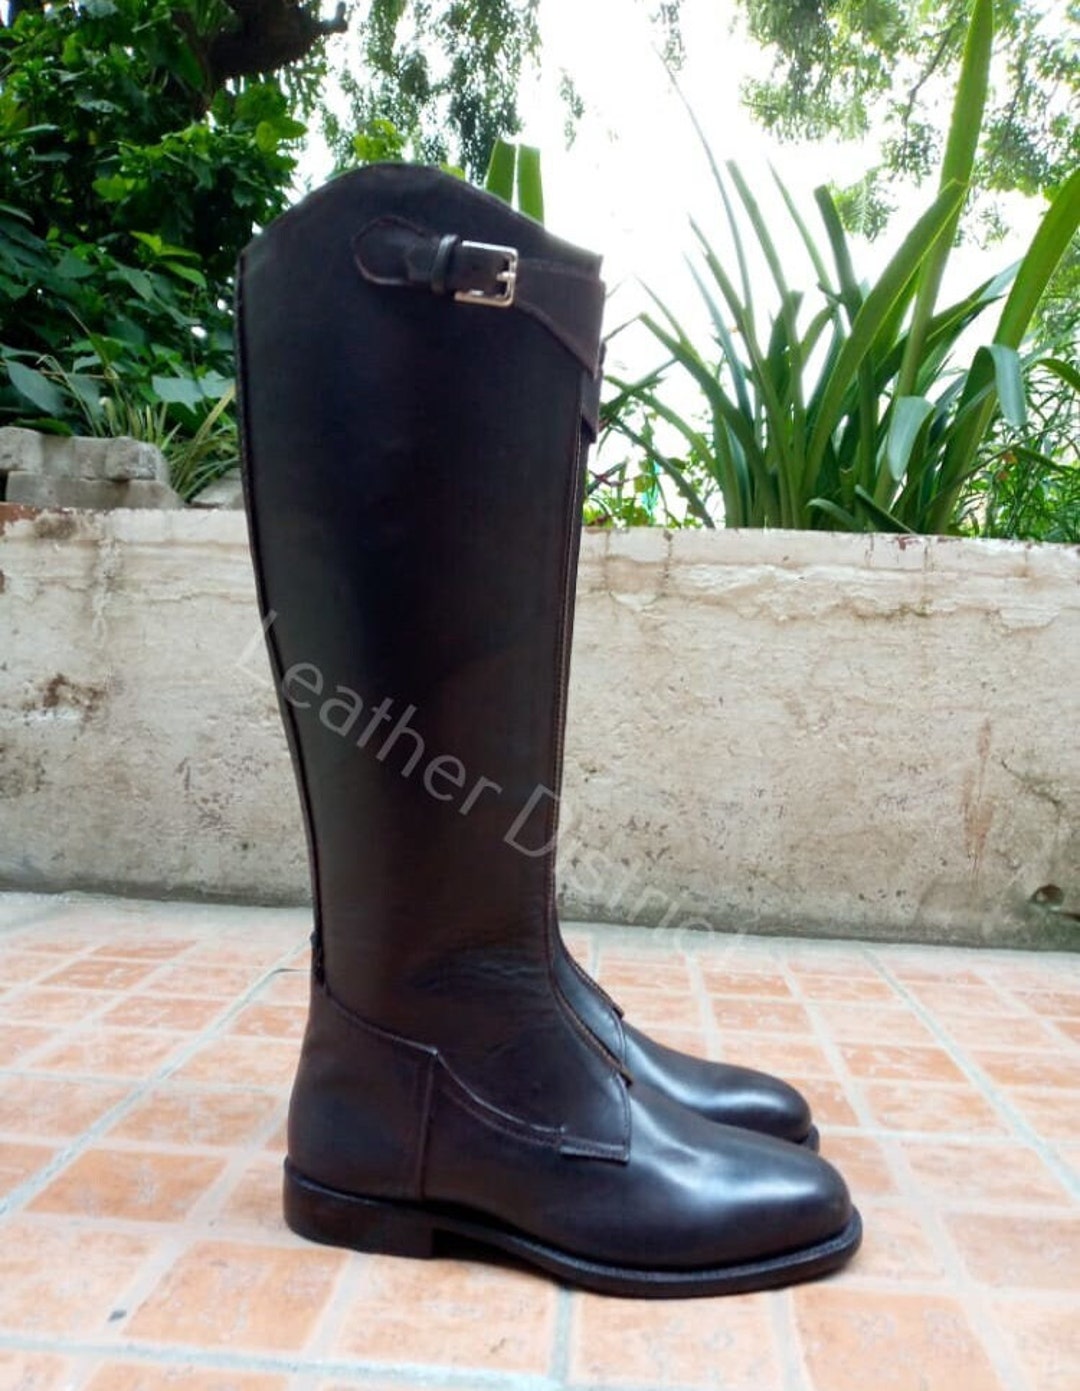 Leather Equestrian Riding Boots Men Uniform Riding Boots - Etsy